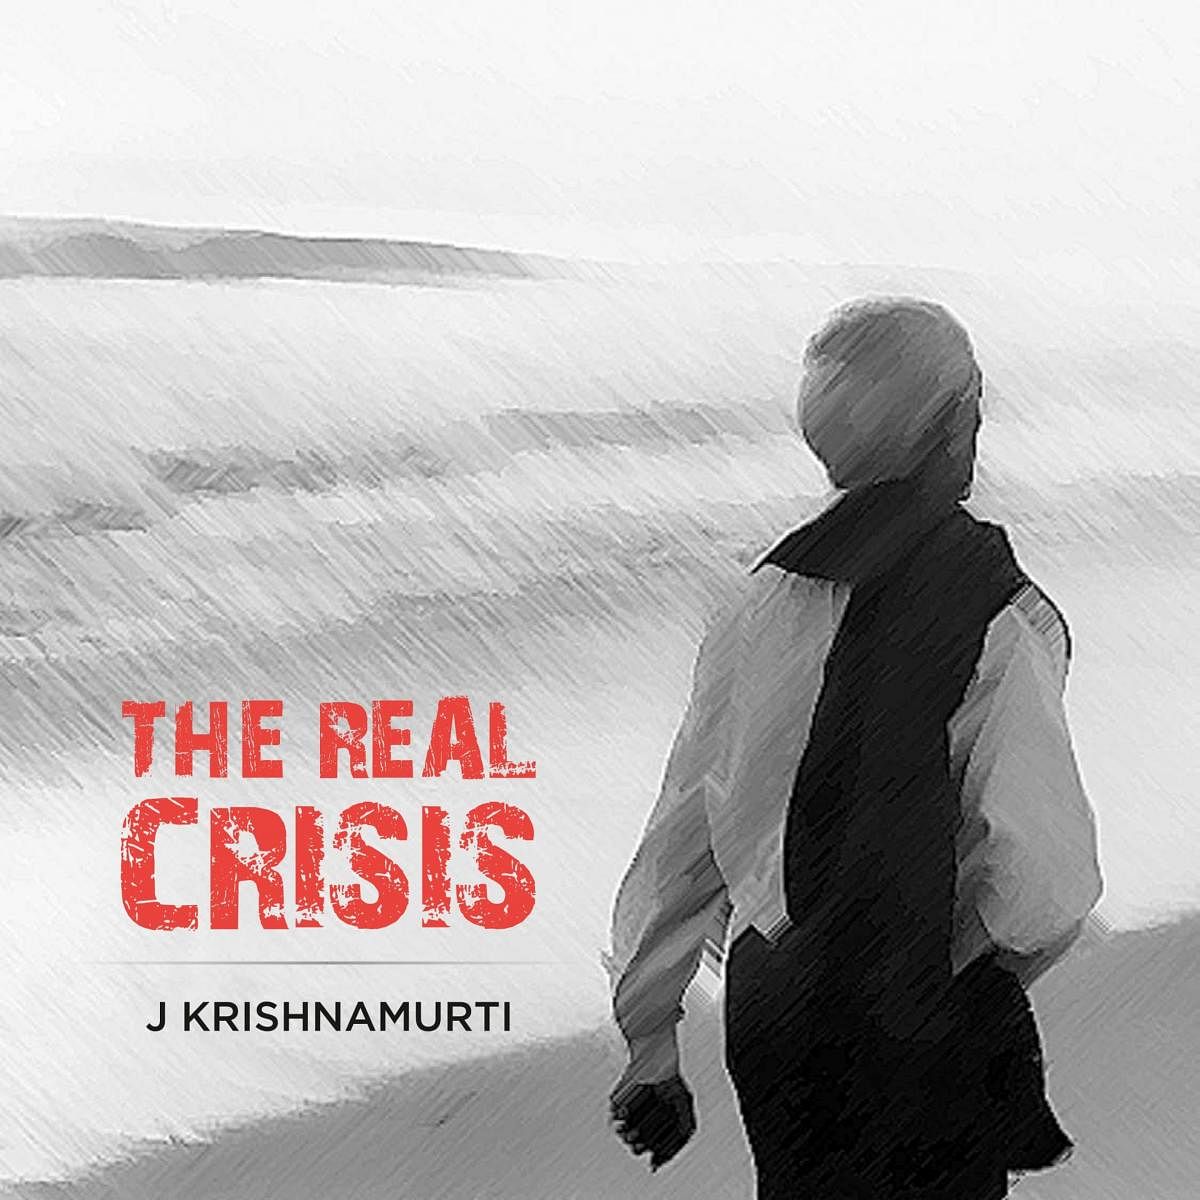 'The Real Crisis' is available online for free.